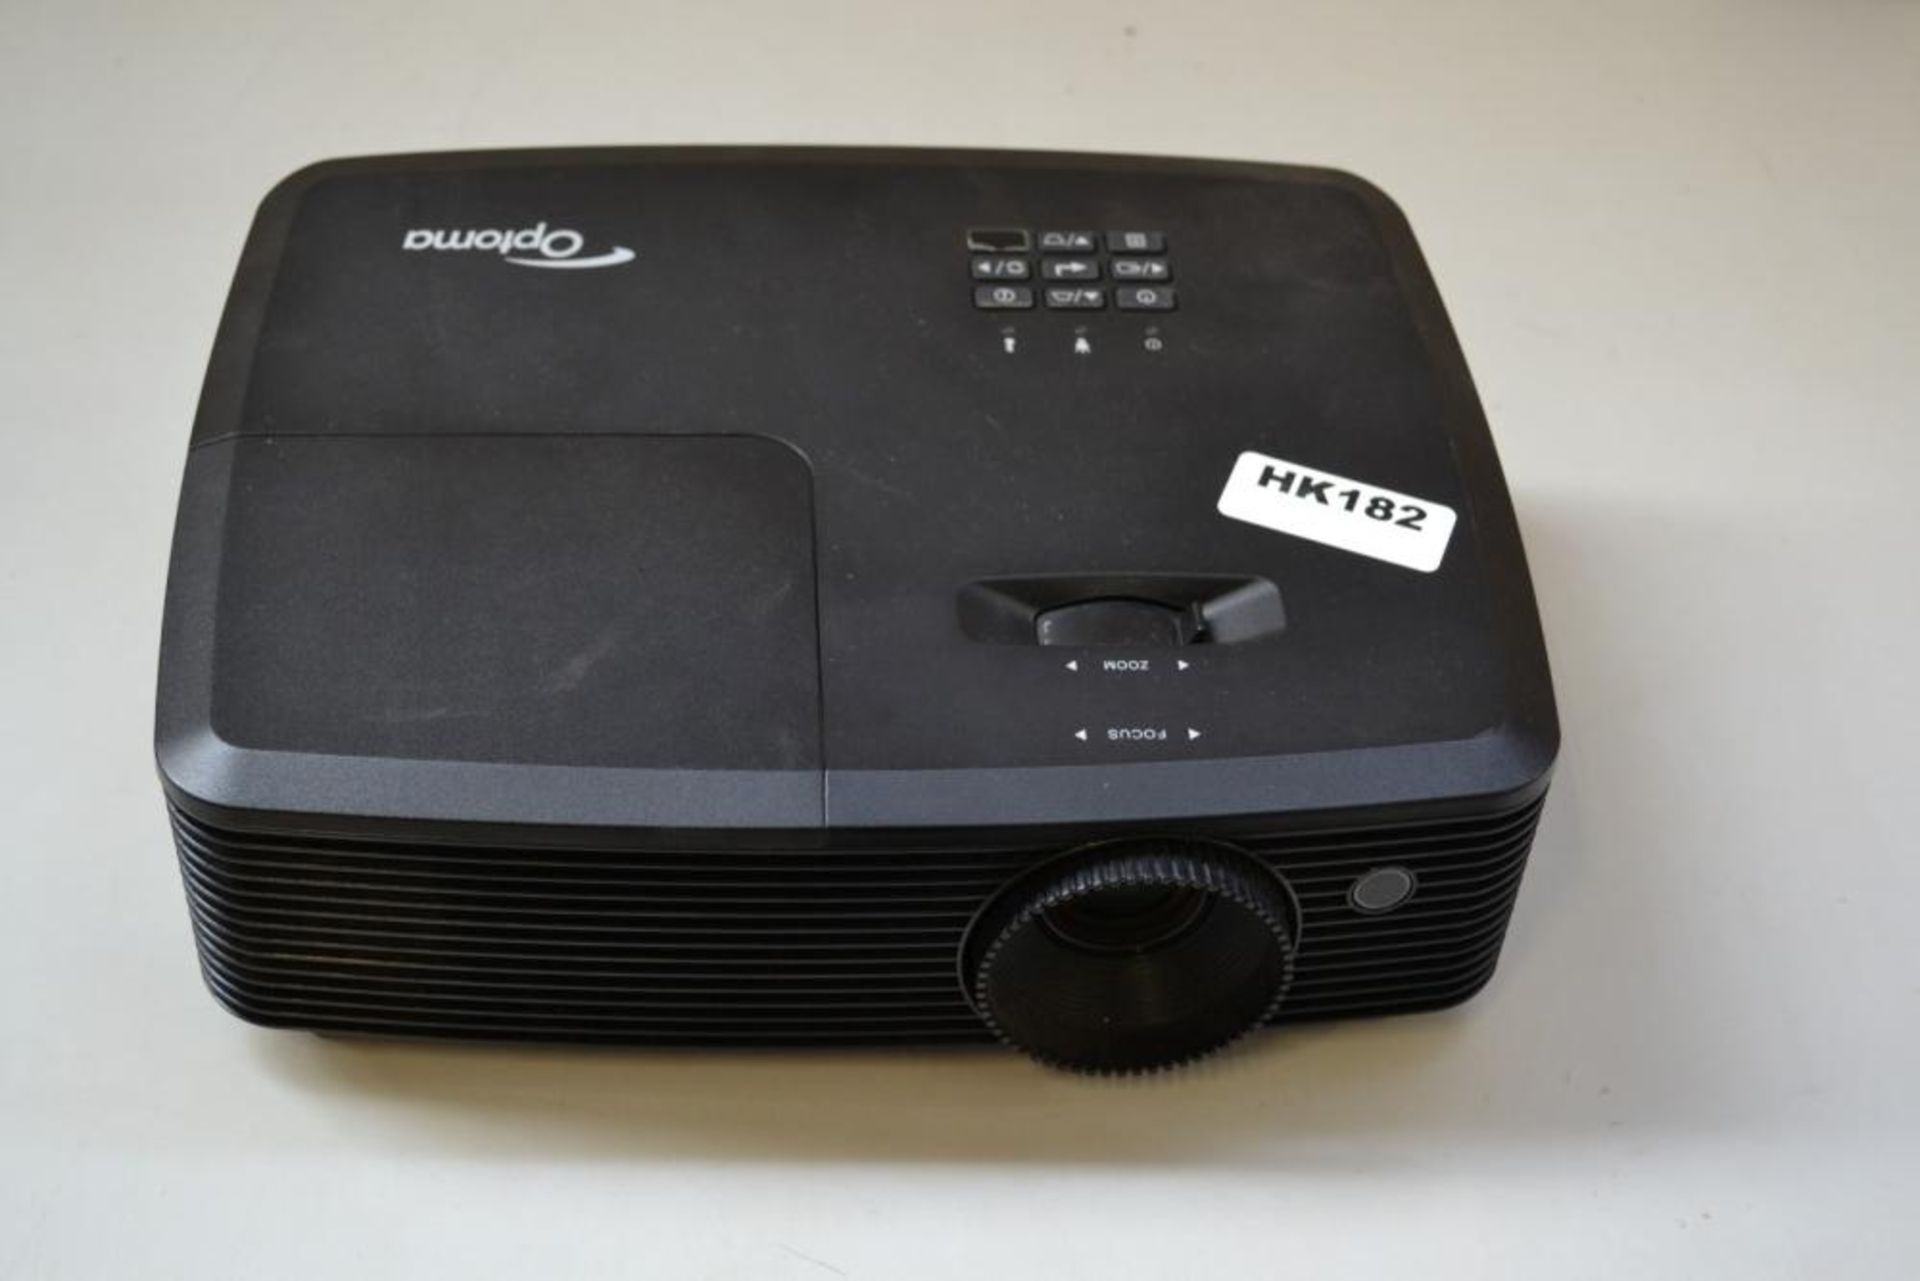 1 x Optoma Projector S331 Black - Ref HK182 - CL394 - Location: Altrincham WA14 - HKPal2 As - Image 2 of 6